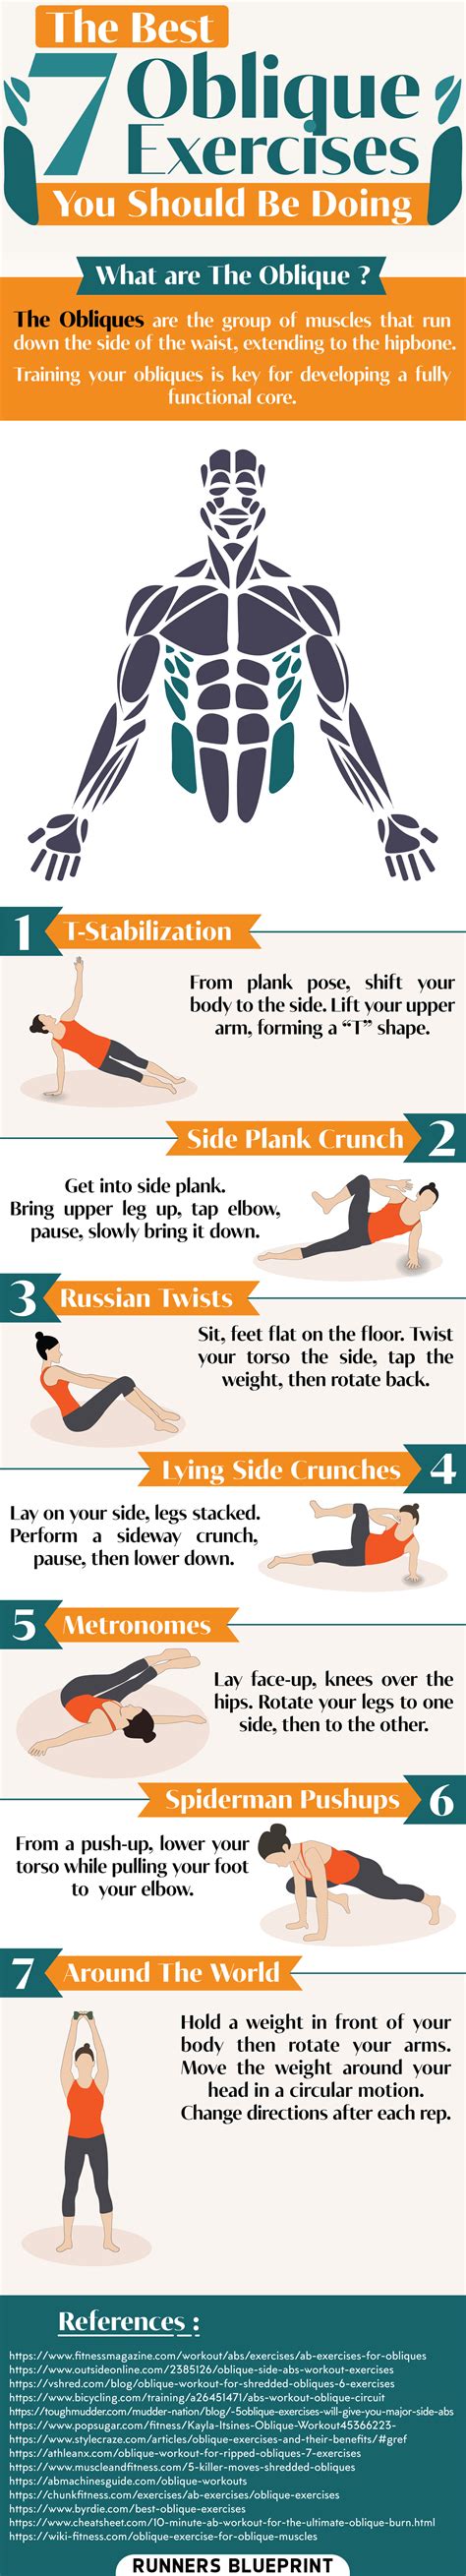 the 7 best oblique exercises a 30 minute side abs